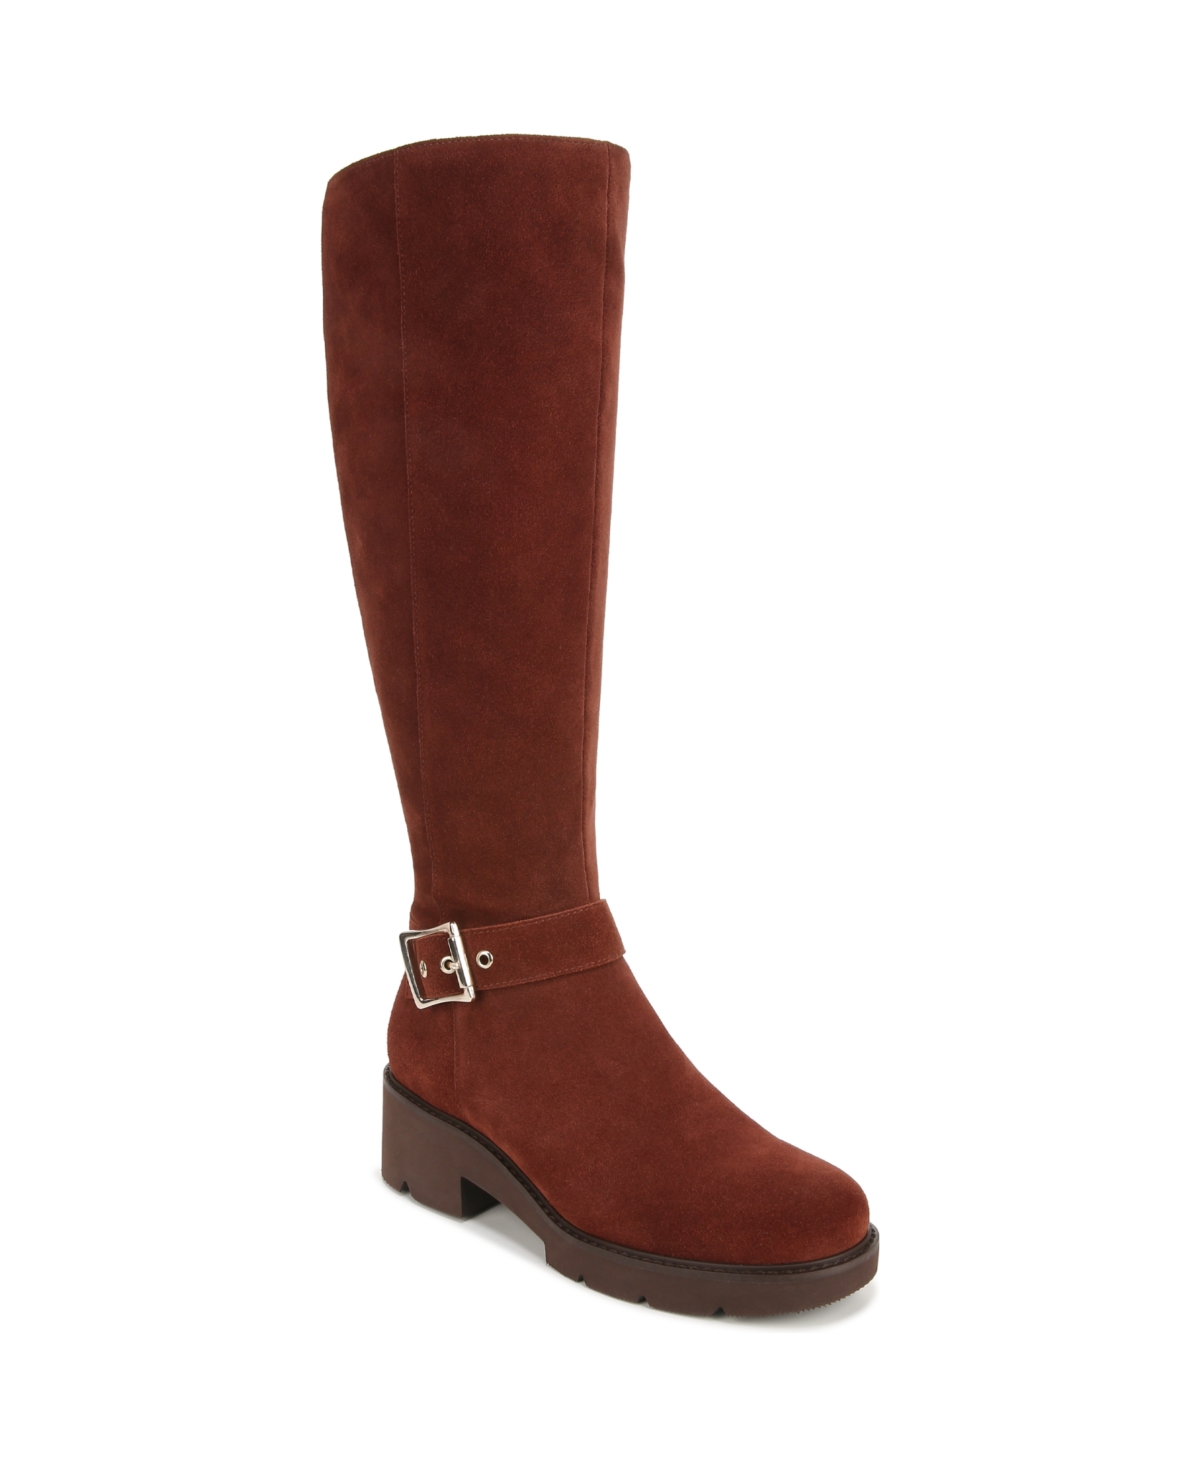 Darry-Tall Wide Calf High Shaft Boots - Cappuccino Suede